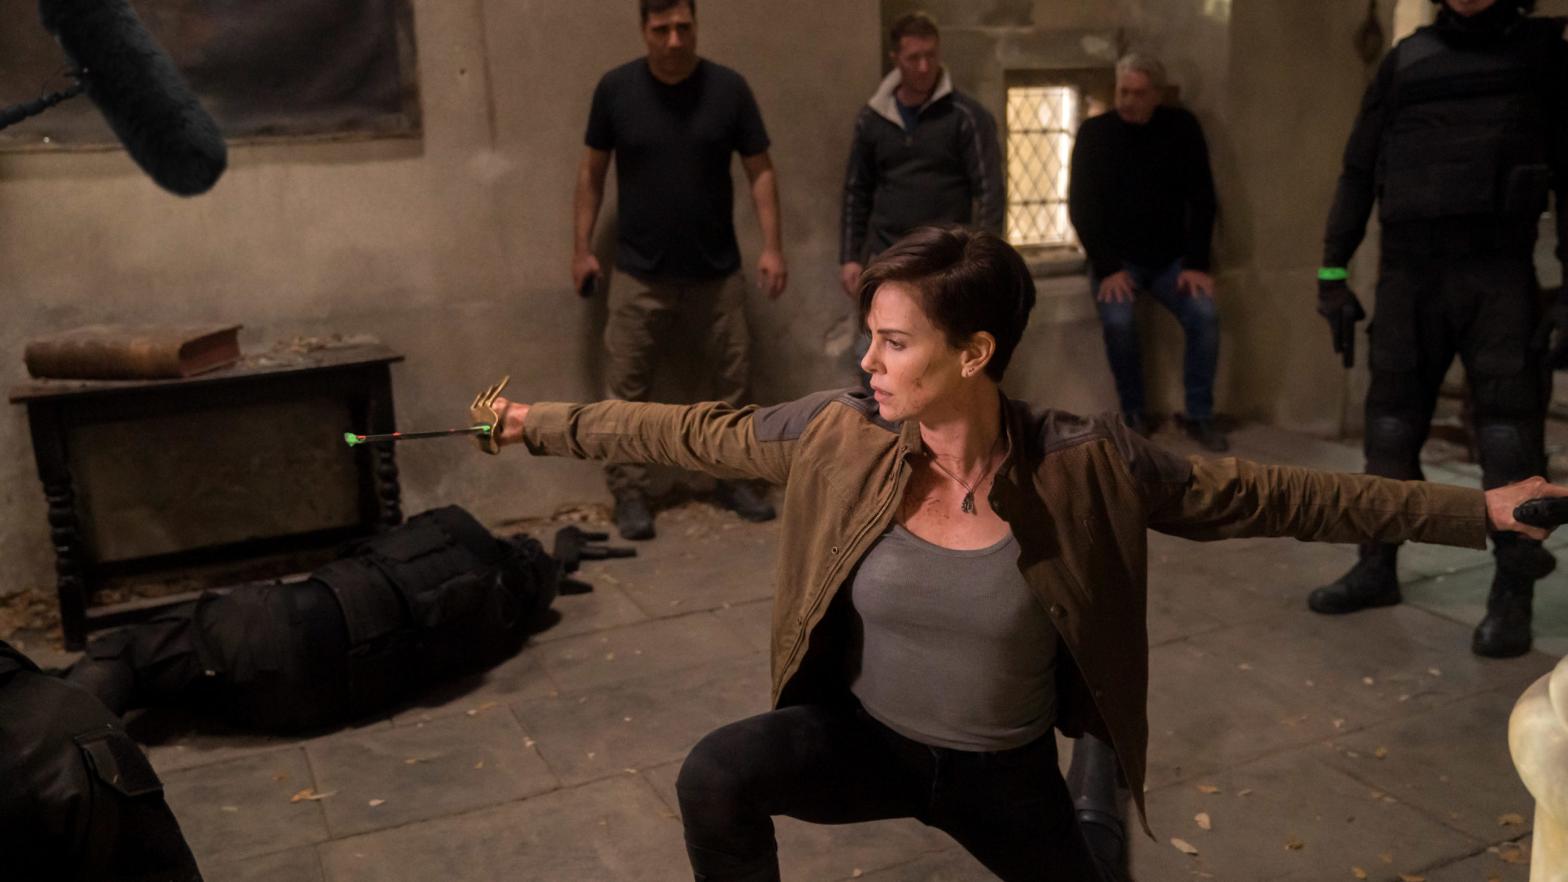 Charlize Theron is directed in a scene from The Old Guard. (Photo: Amy Spinks / Netflix)